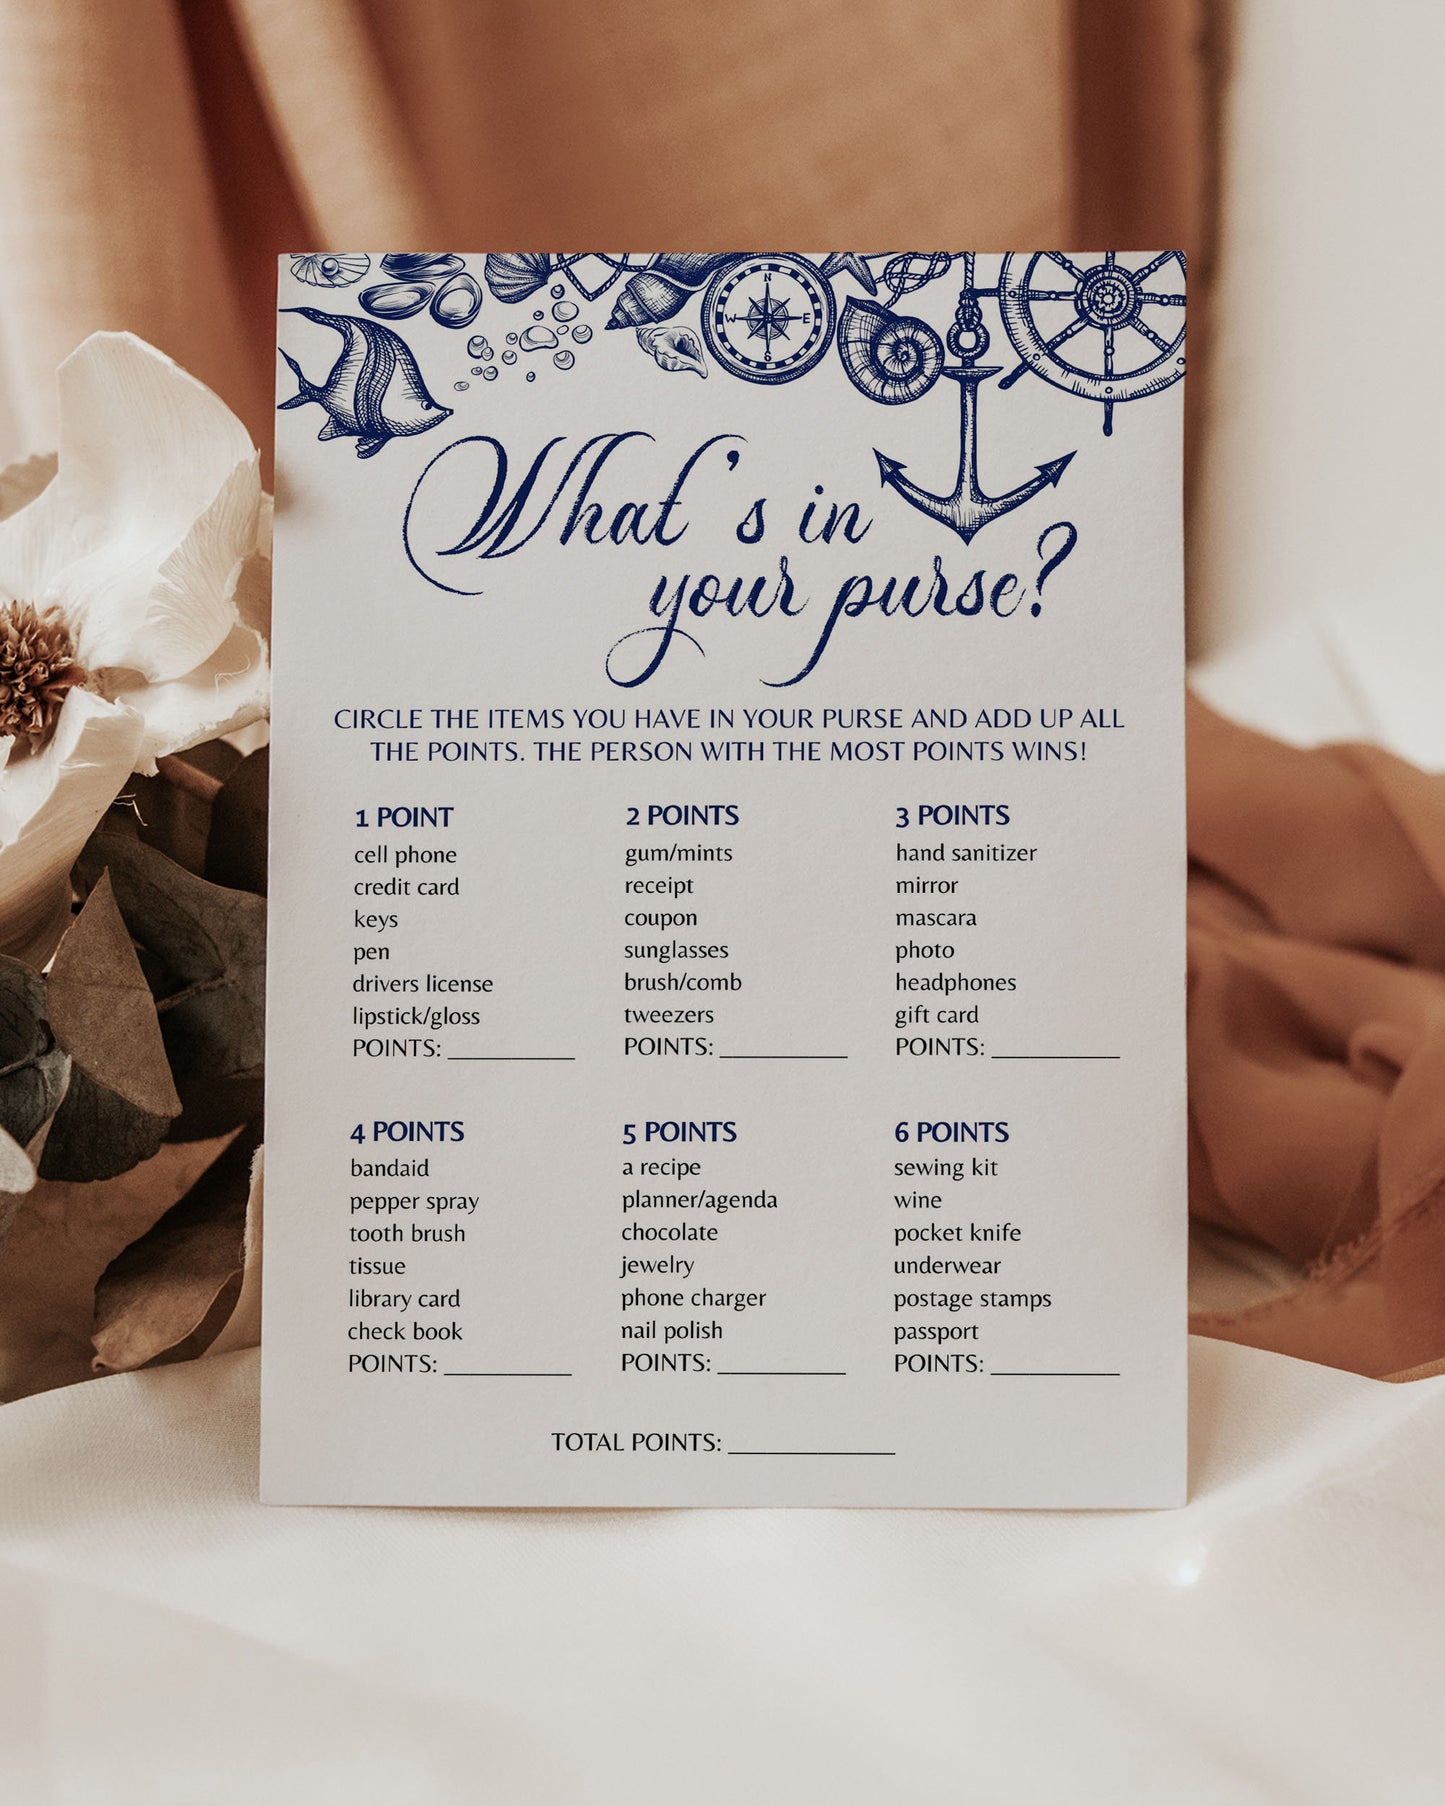 Whats in your purse | Nautical Bridal Shower Game for Beach Themed Bridal Brunch or Destination Bachelorette Party | Printable Template